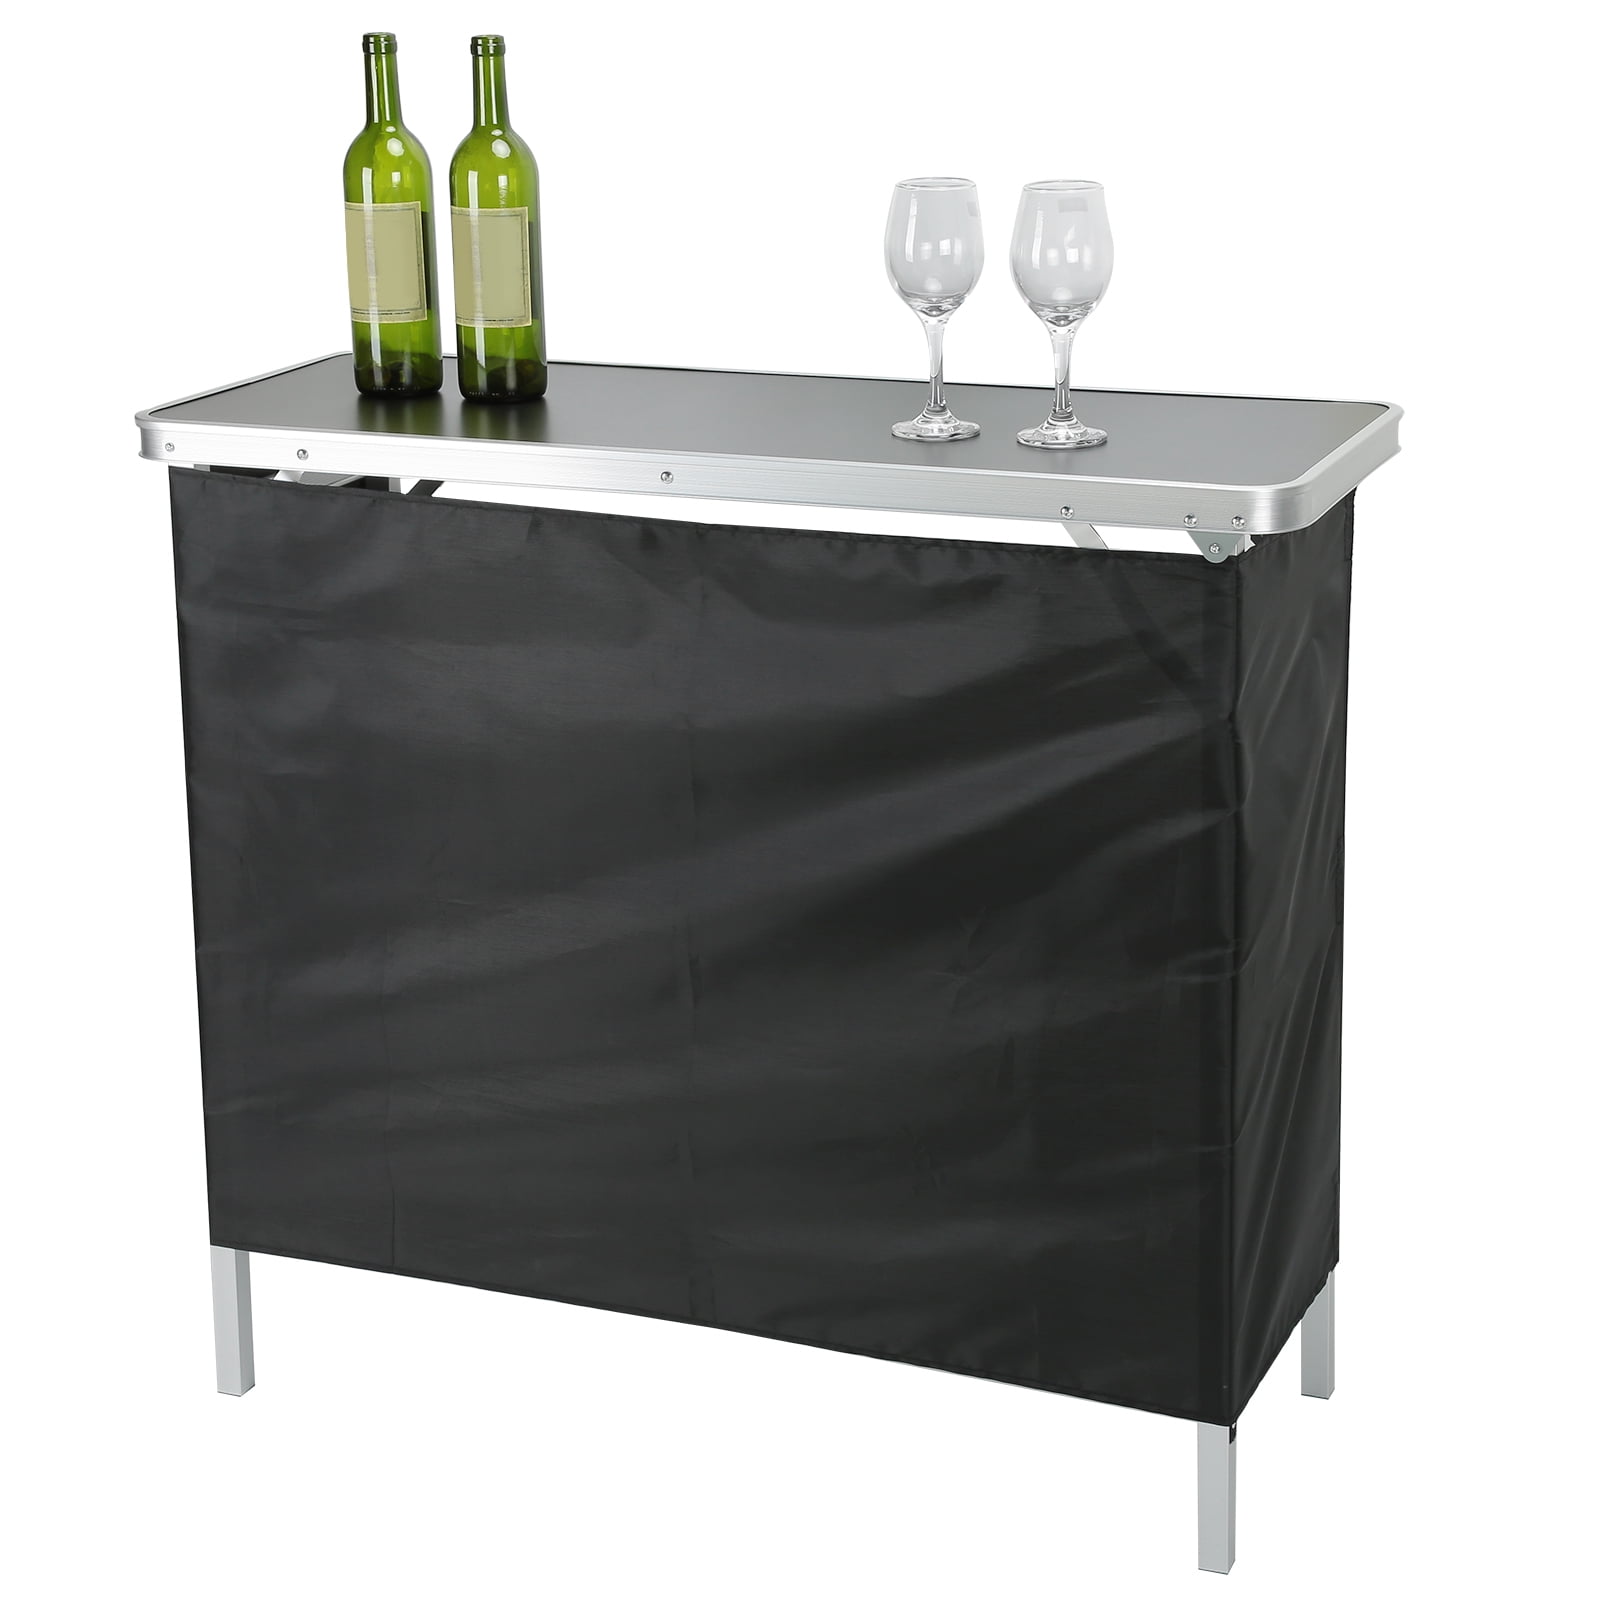 LYUMO Folding Bar Table Multipurpose Portable Storage Table Furniture for Party Trade Show Bar Accessory Party Supplies